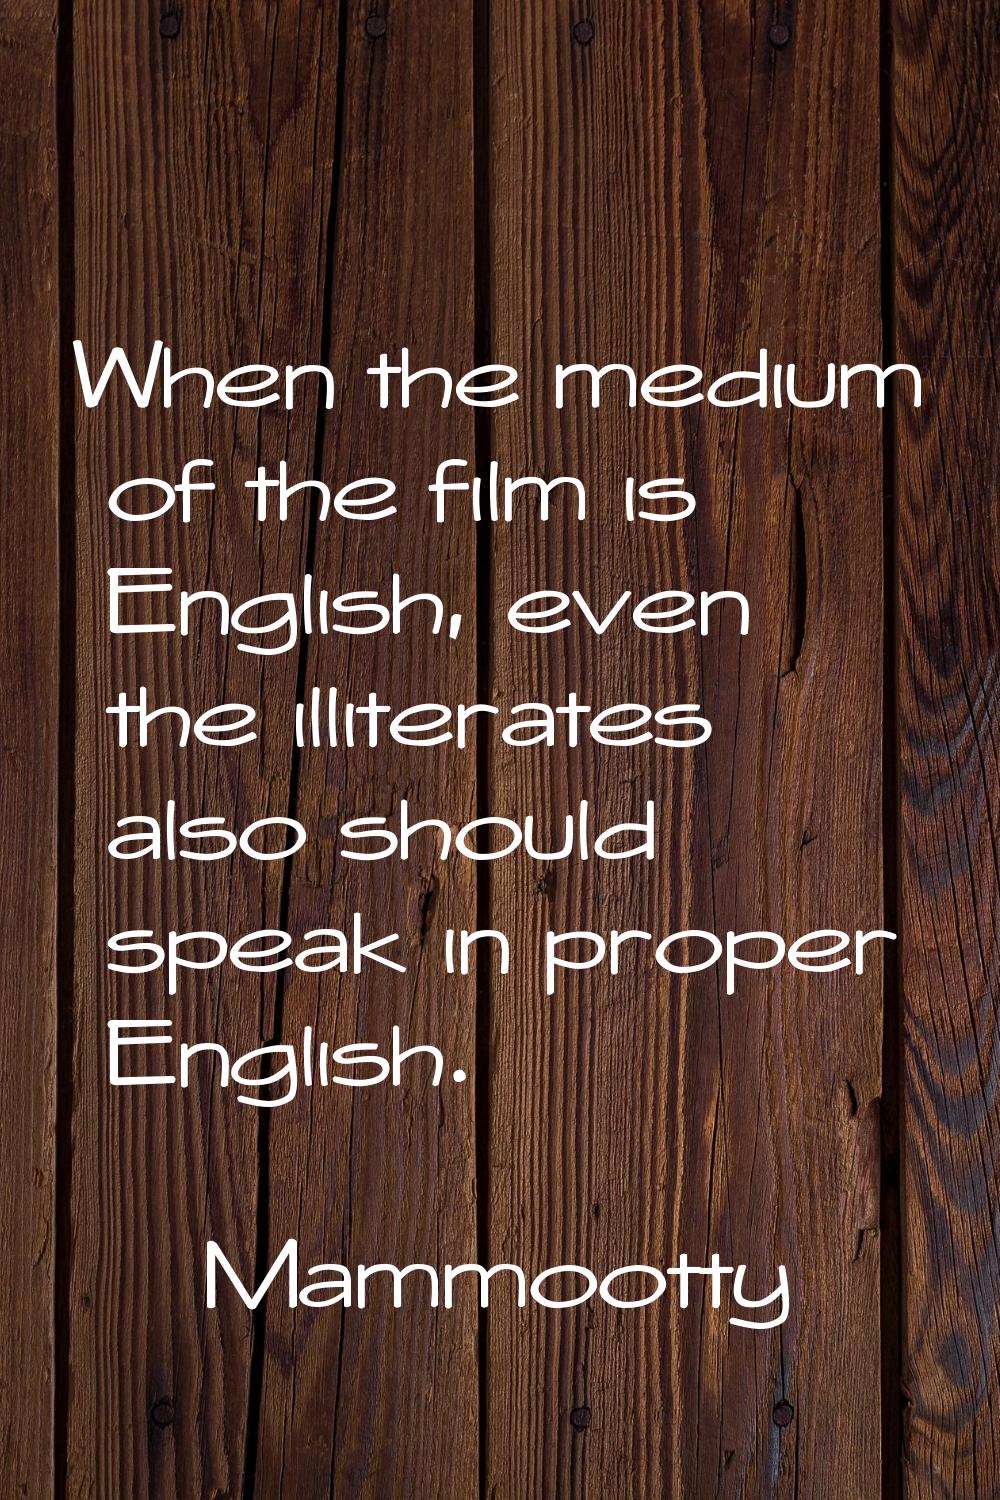 When the medium of the film is English, even the illiterates also should speak in proper English.